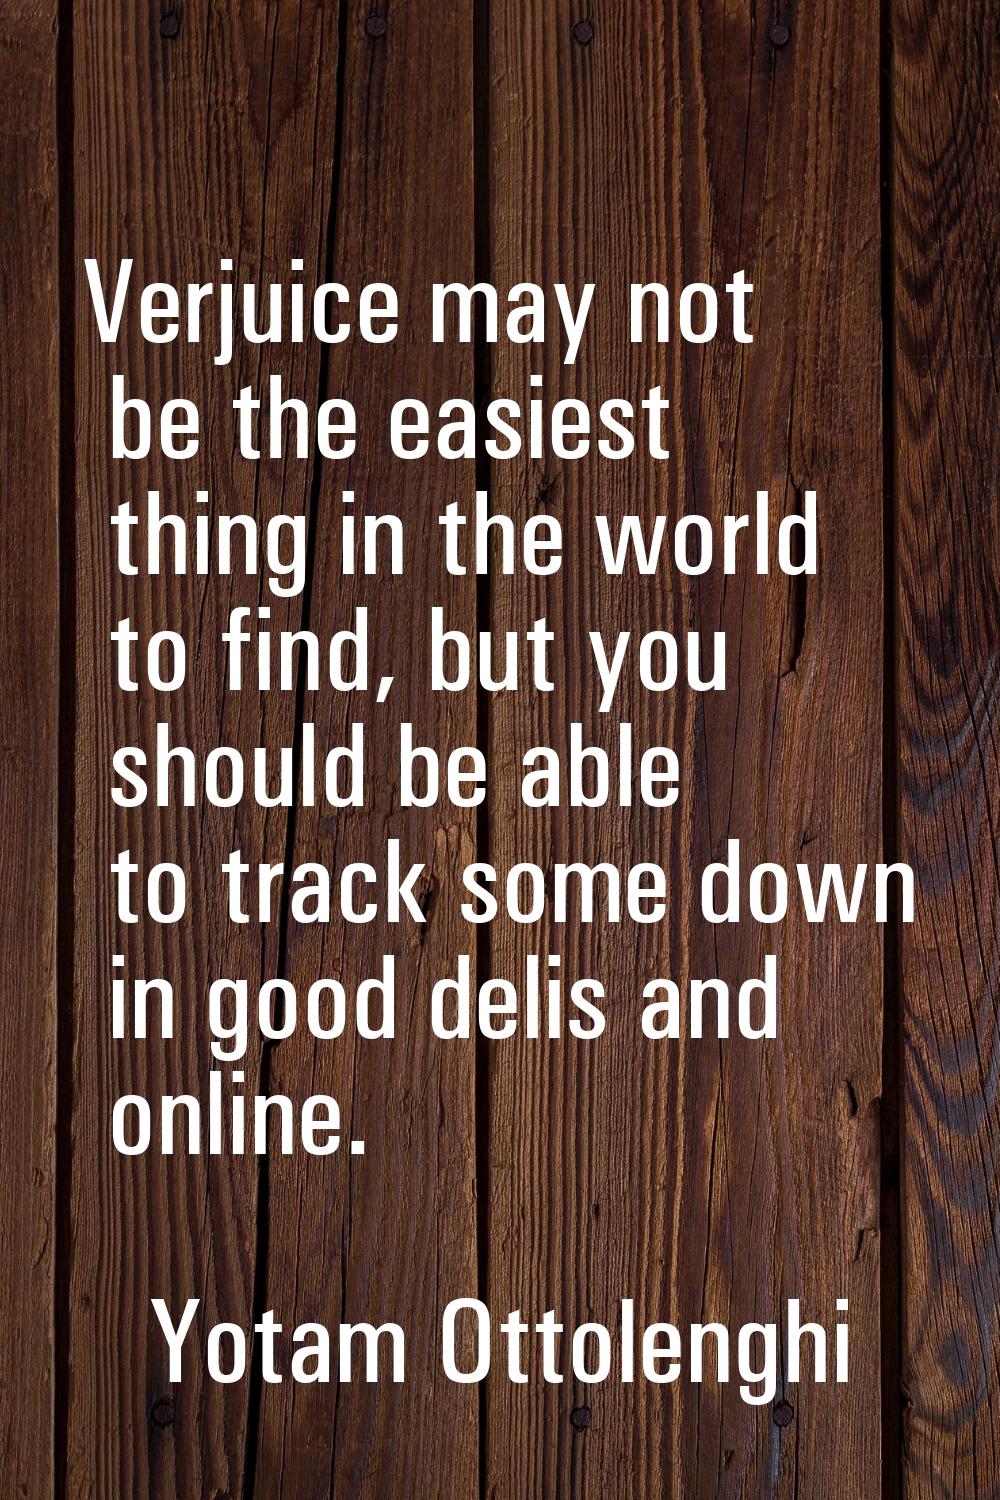 Verjuice may not be the easiest thing in the world to find, but you should be able to track some do